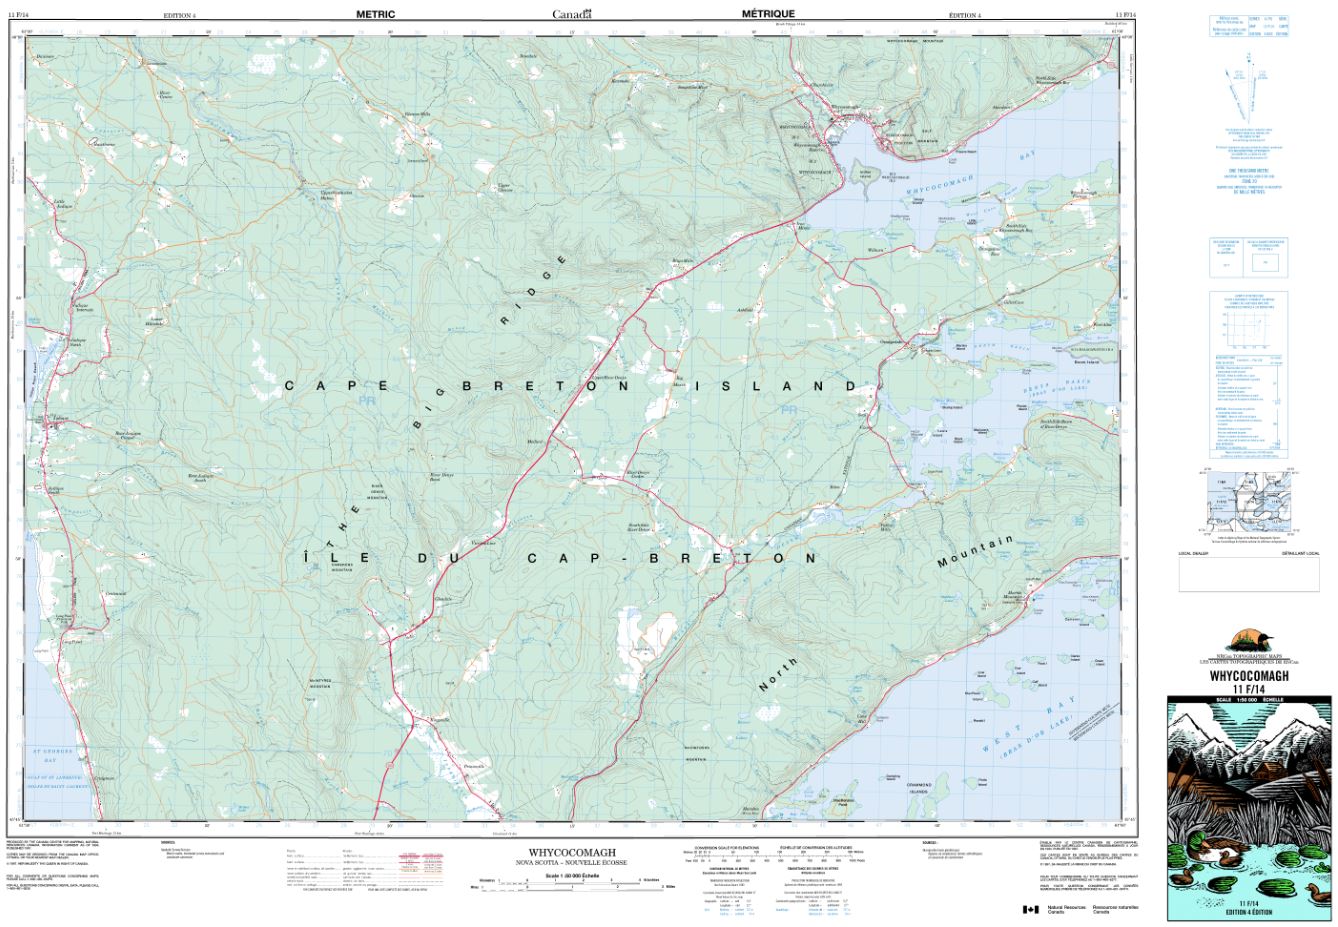 11f14 Whycocomagh Topographic Map Nova Scotia Tyvek Maps And More 2231